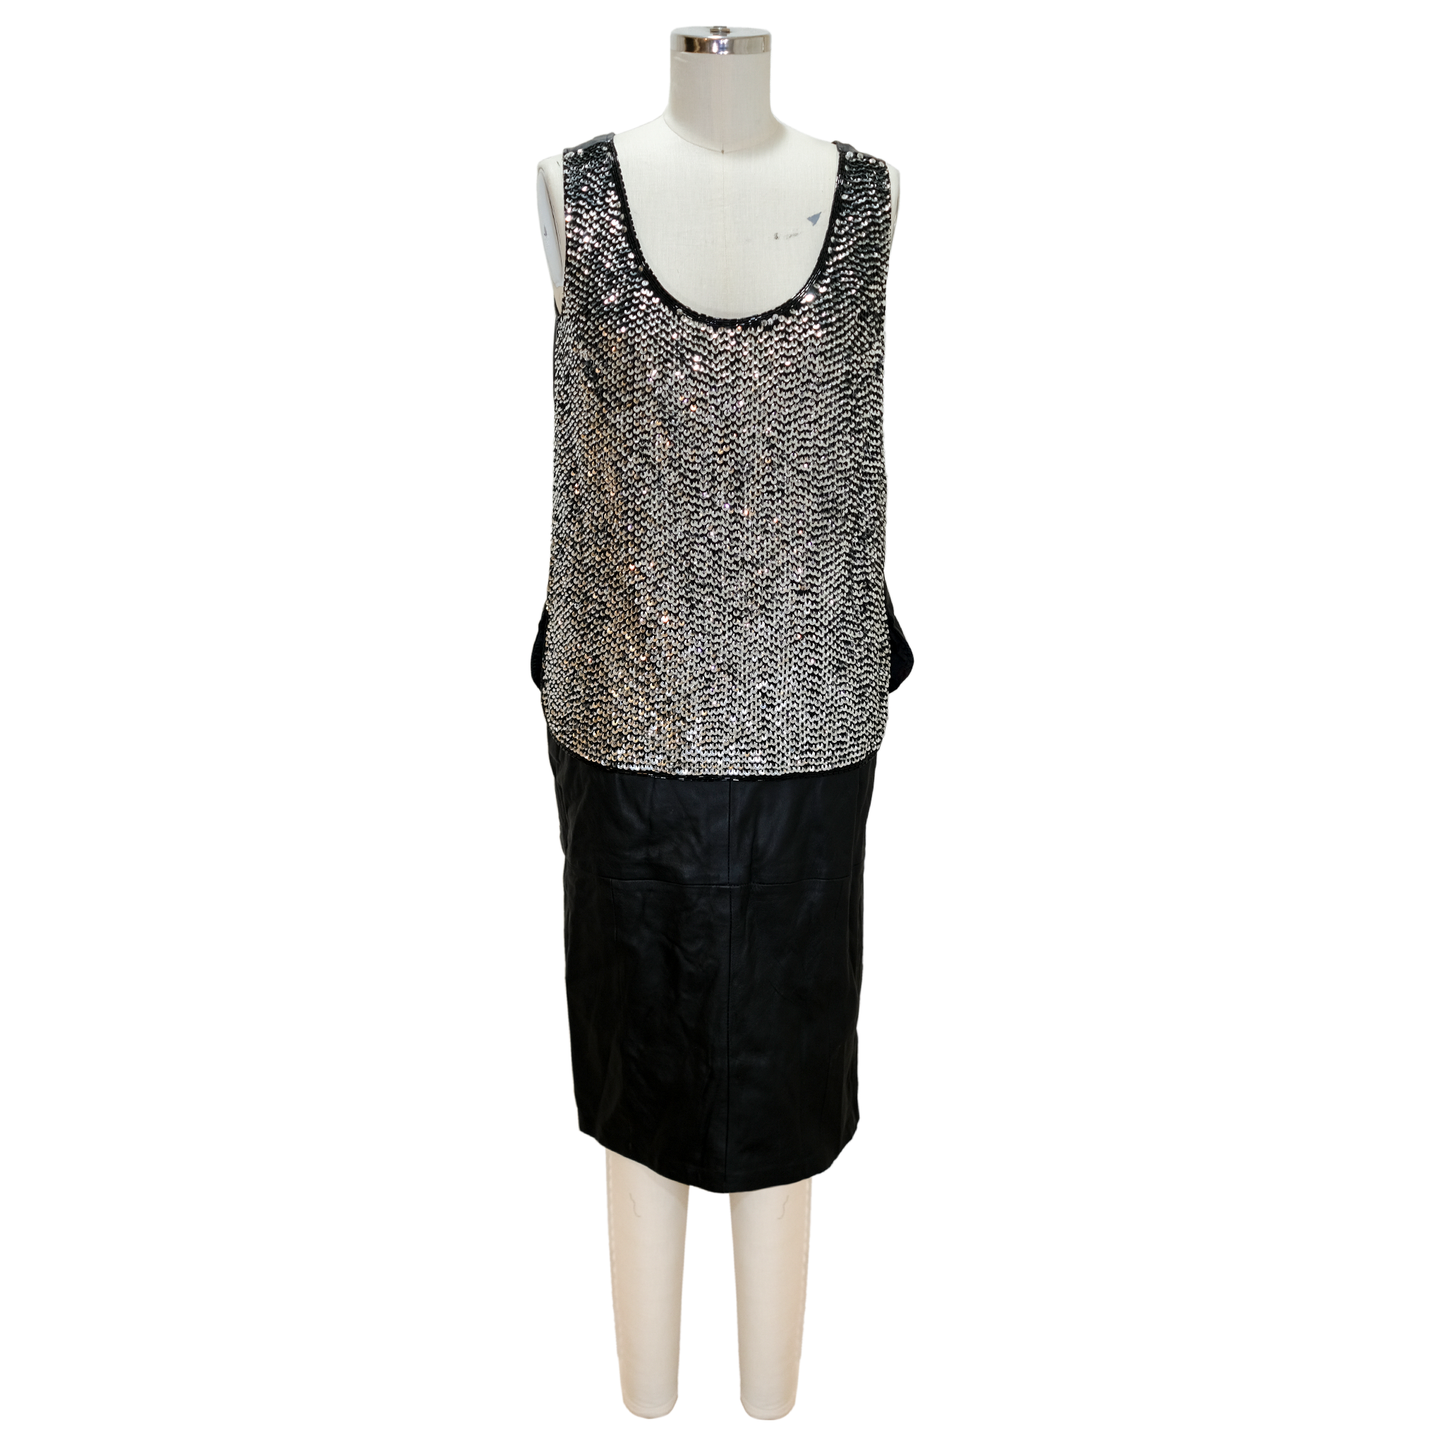 Vintage Leather and Sequin Skirt and Tank Top 2 Piece Set - Size Medium